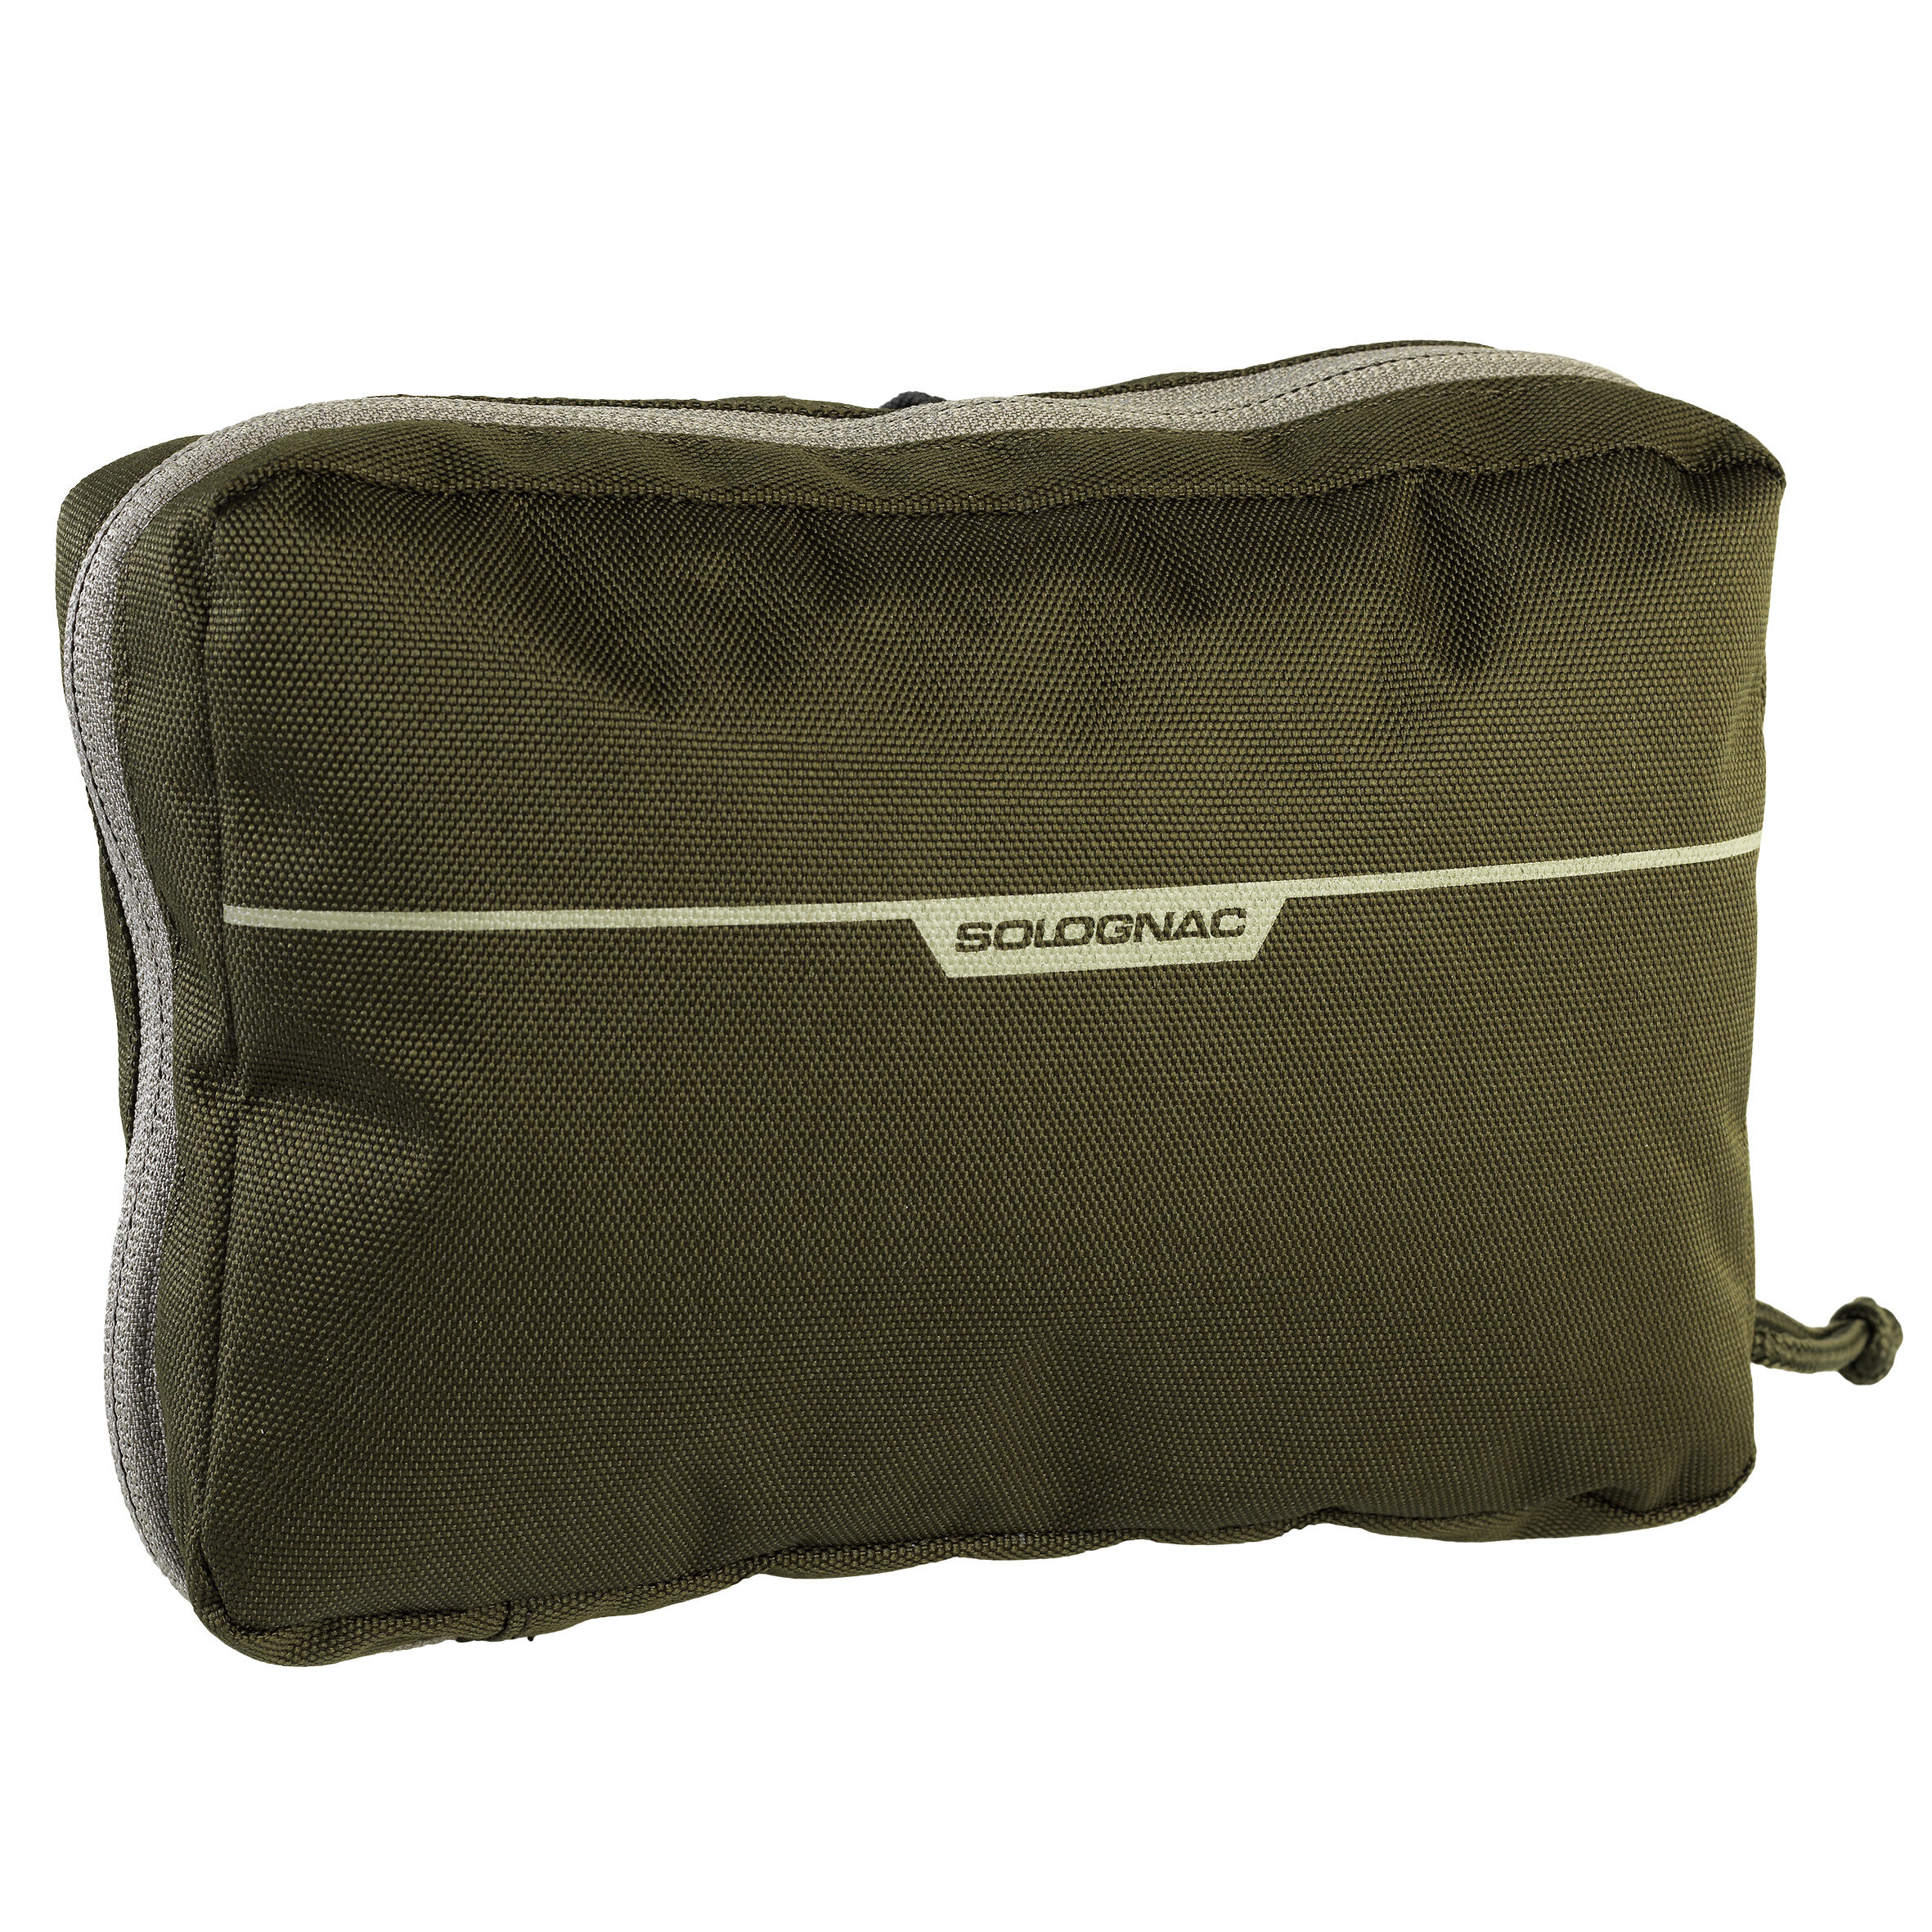 X-Access Hunting Pouch with Secure Zipped Compartments - Green - SOLOGNAC